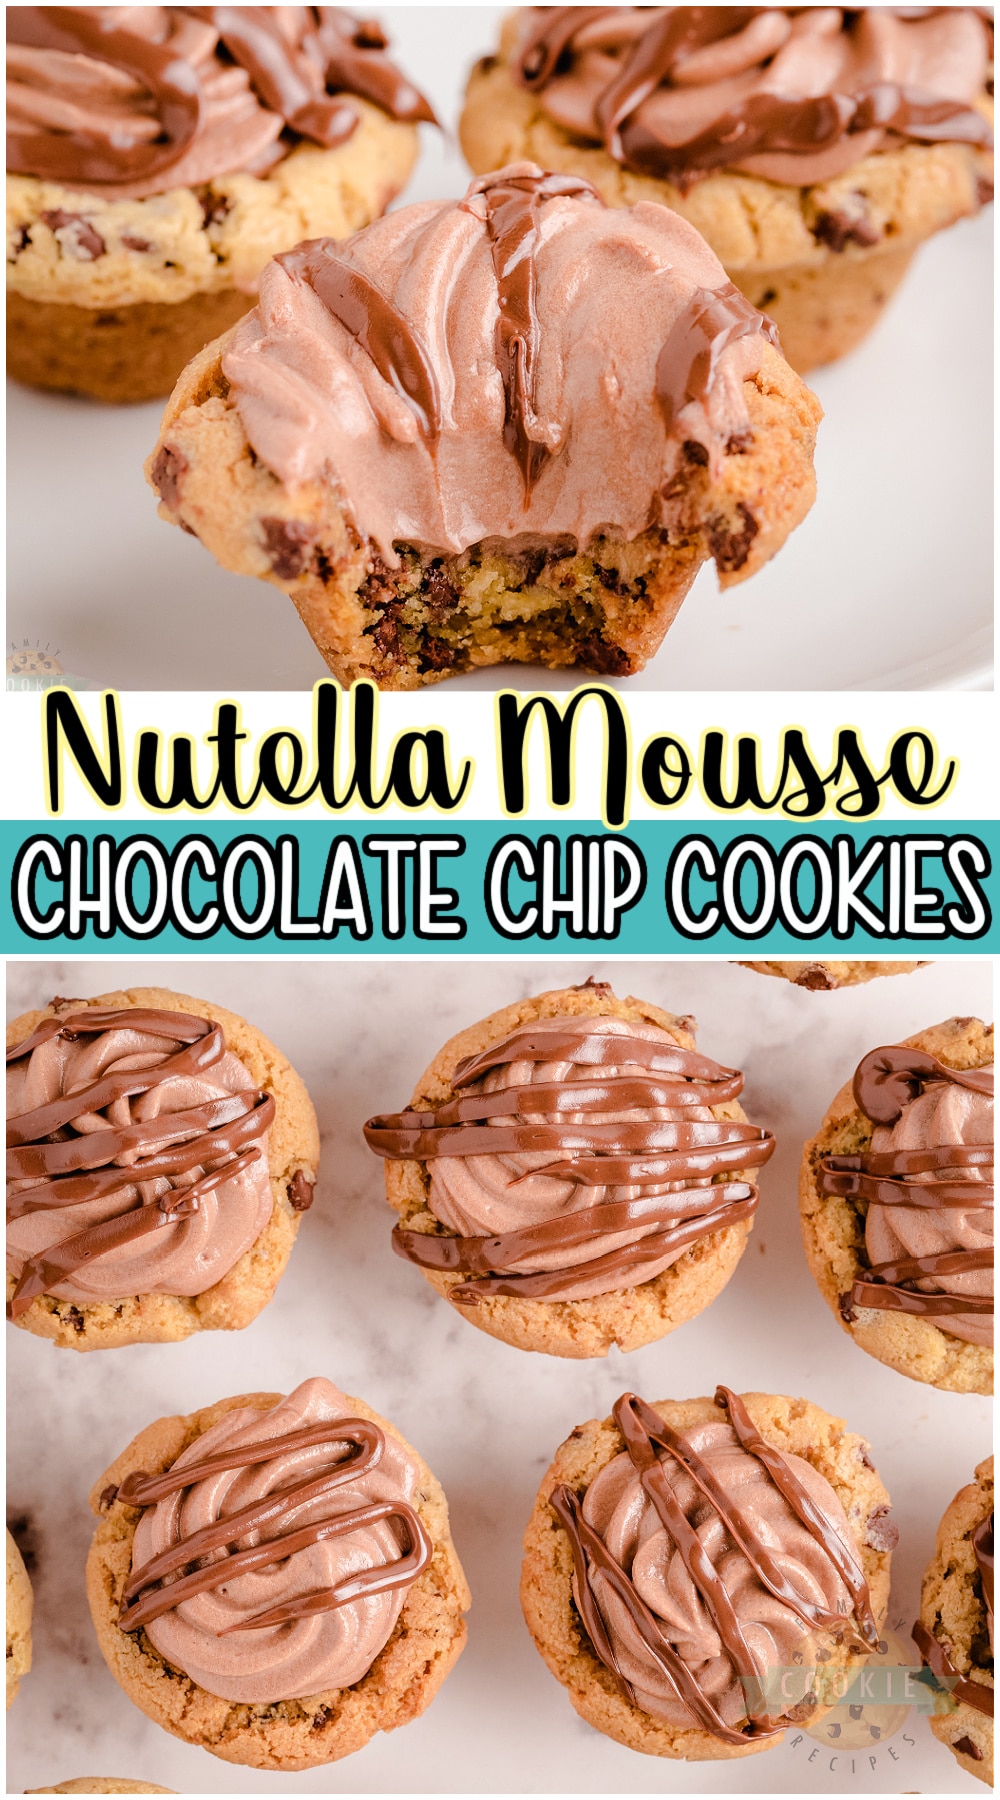 Nutella Mousse cookies made with chocolate chip cookie cups & a super simple Nutella Mousse inside! Nutella lovers go CRAZY over these cute little cookies! #nutella #cookies #baking #dessert #easyrecipe from FAMILY COOKIE RECIPES via @buttergirls